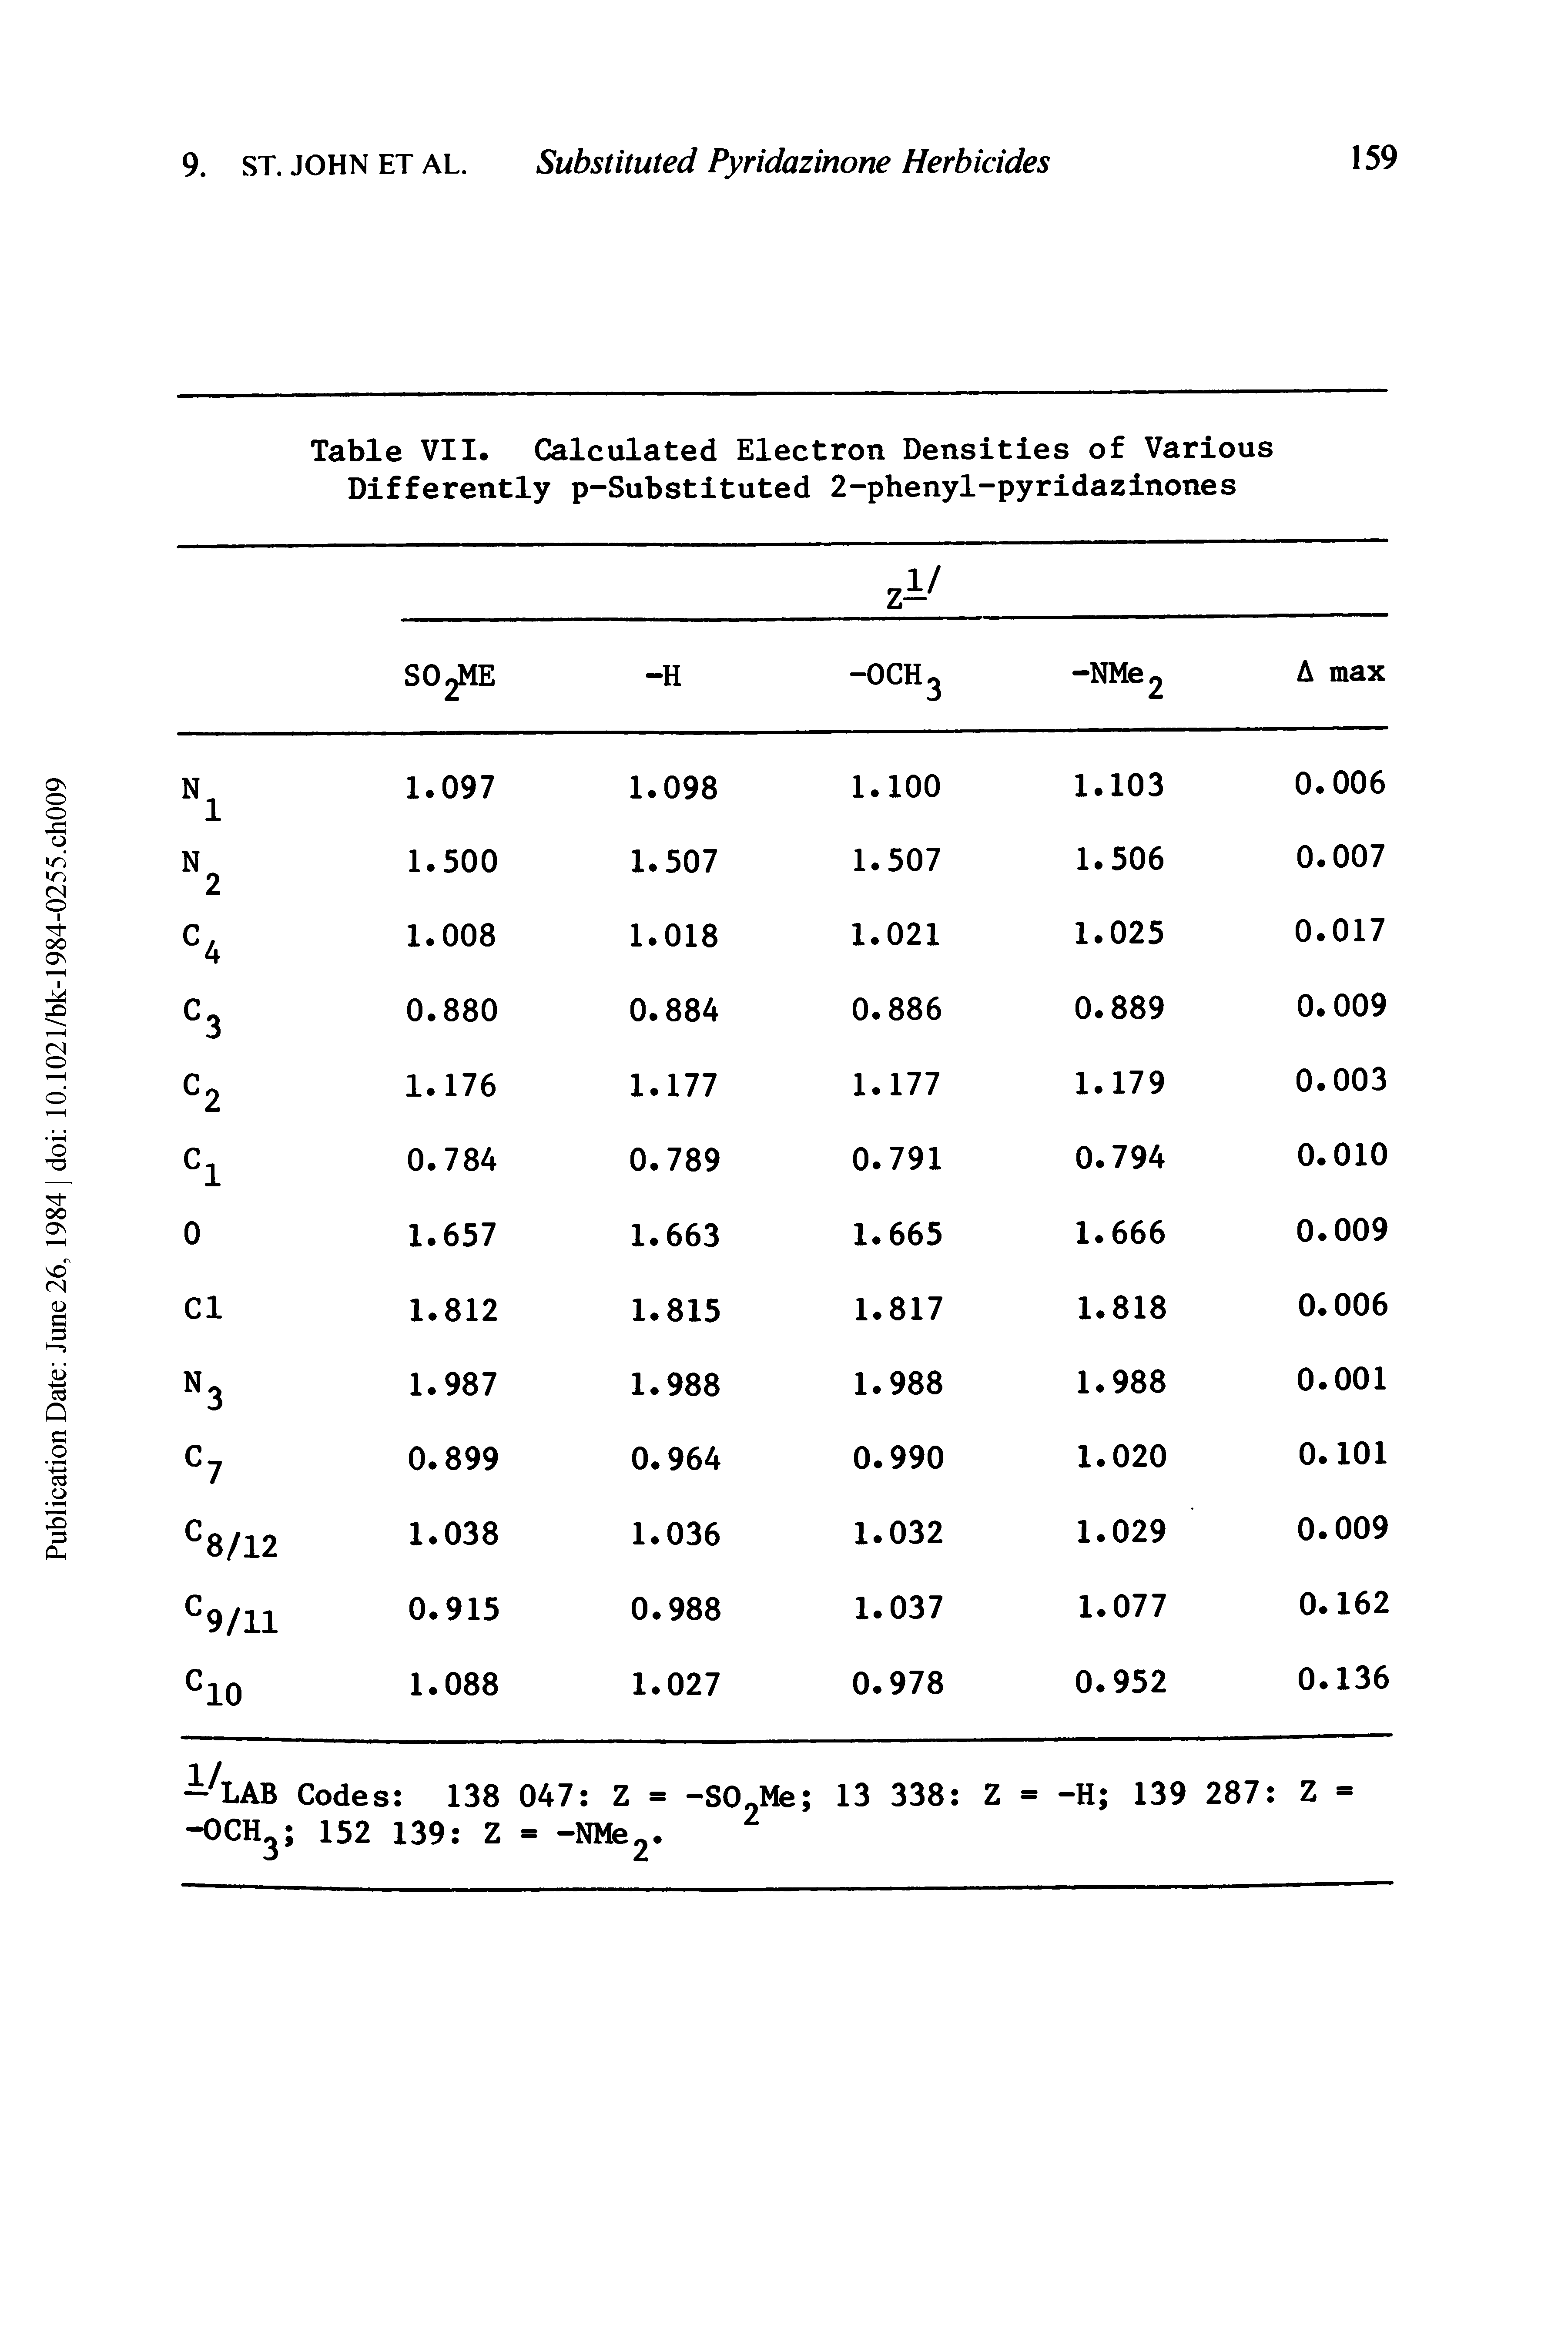 Table VII. Calculated Electron Densities of Various Differently p-Substituted 2-phenyl-pyridazinones...